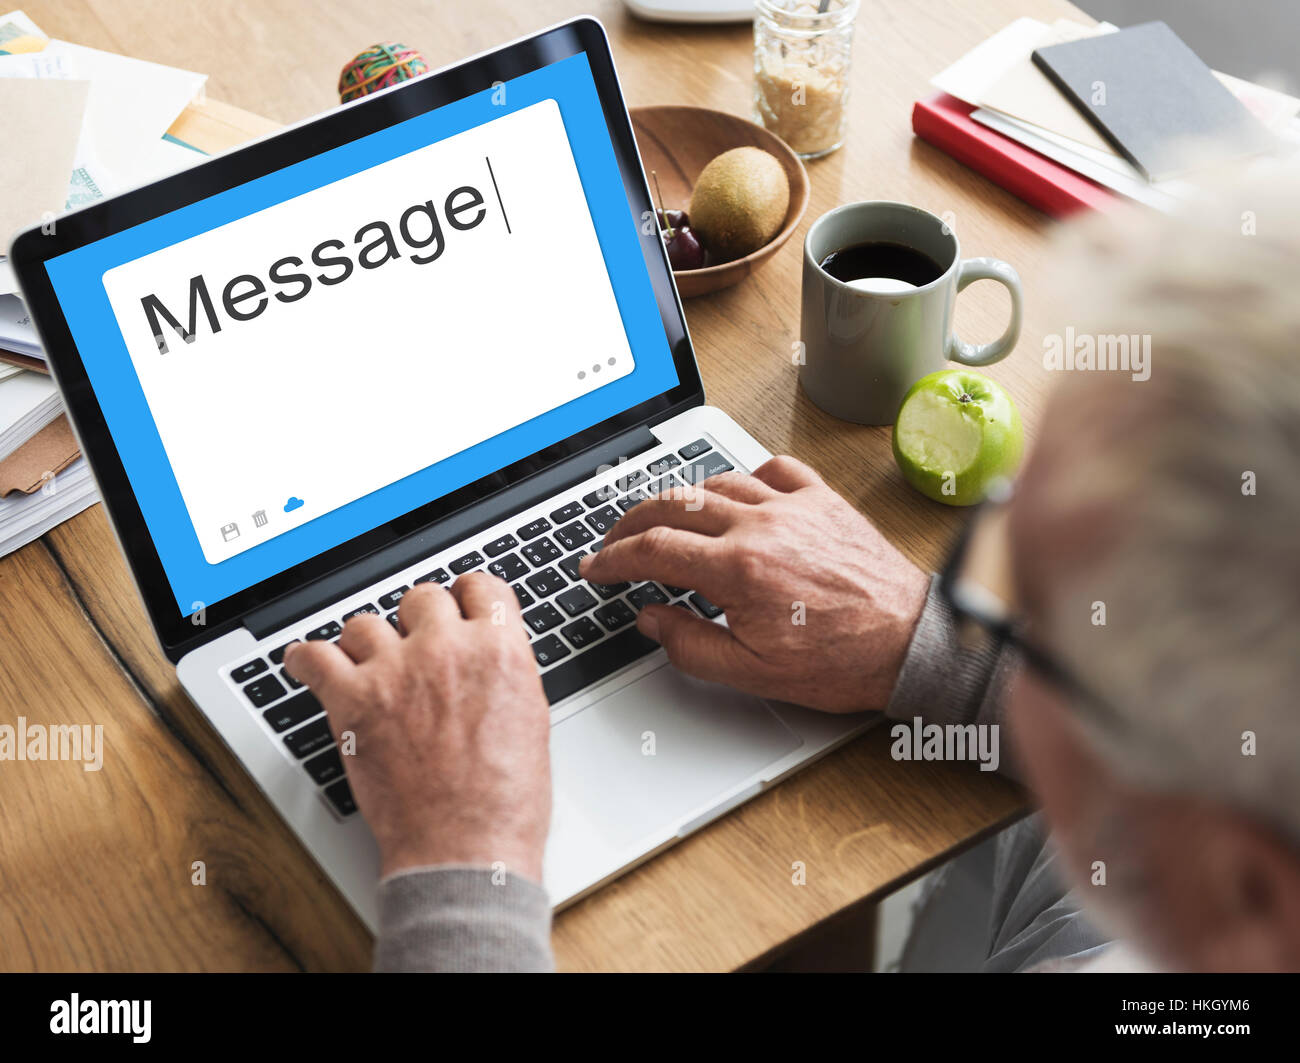 Message Social Network SMS Communication Concept Stock Photo